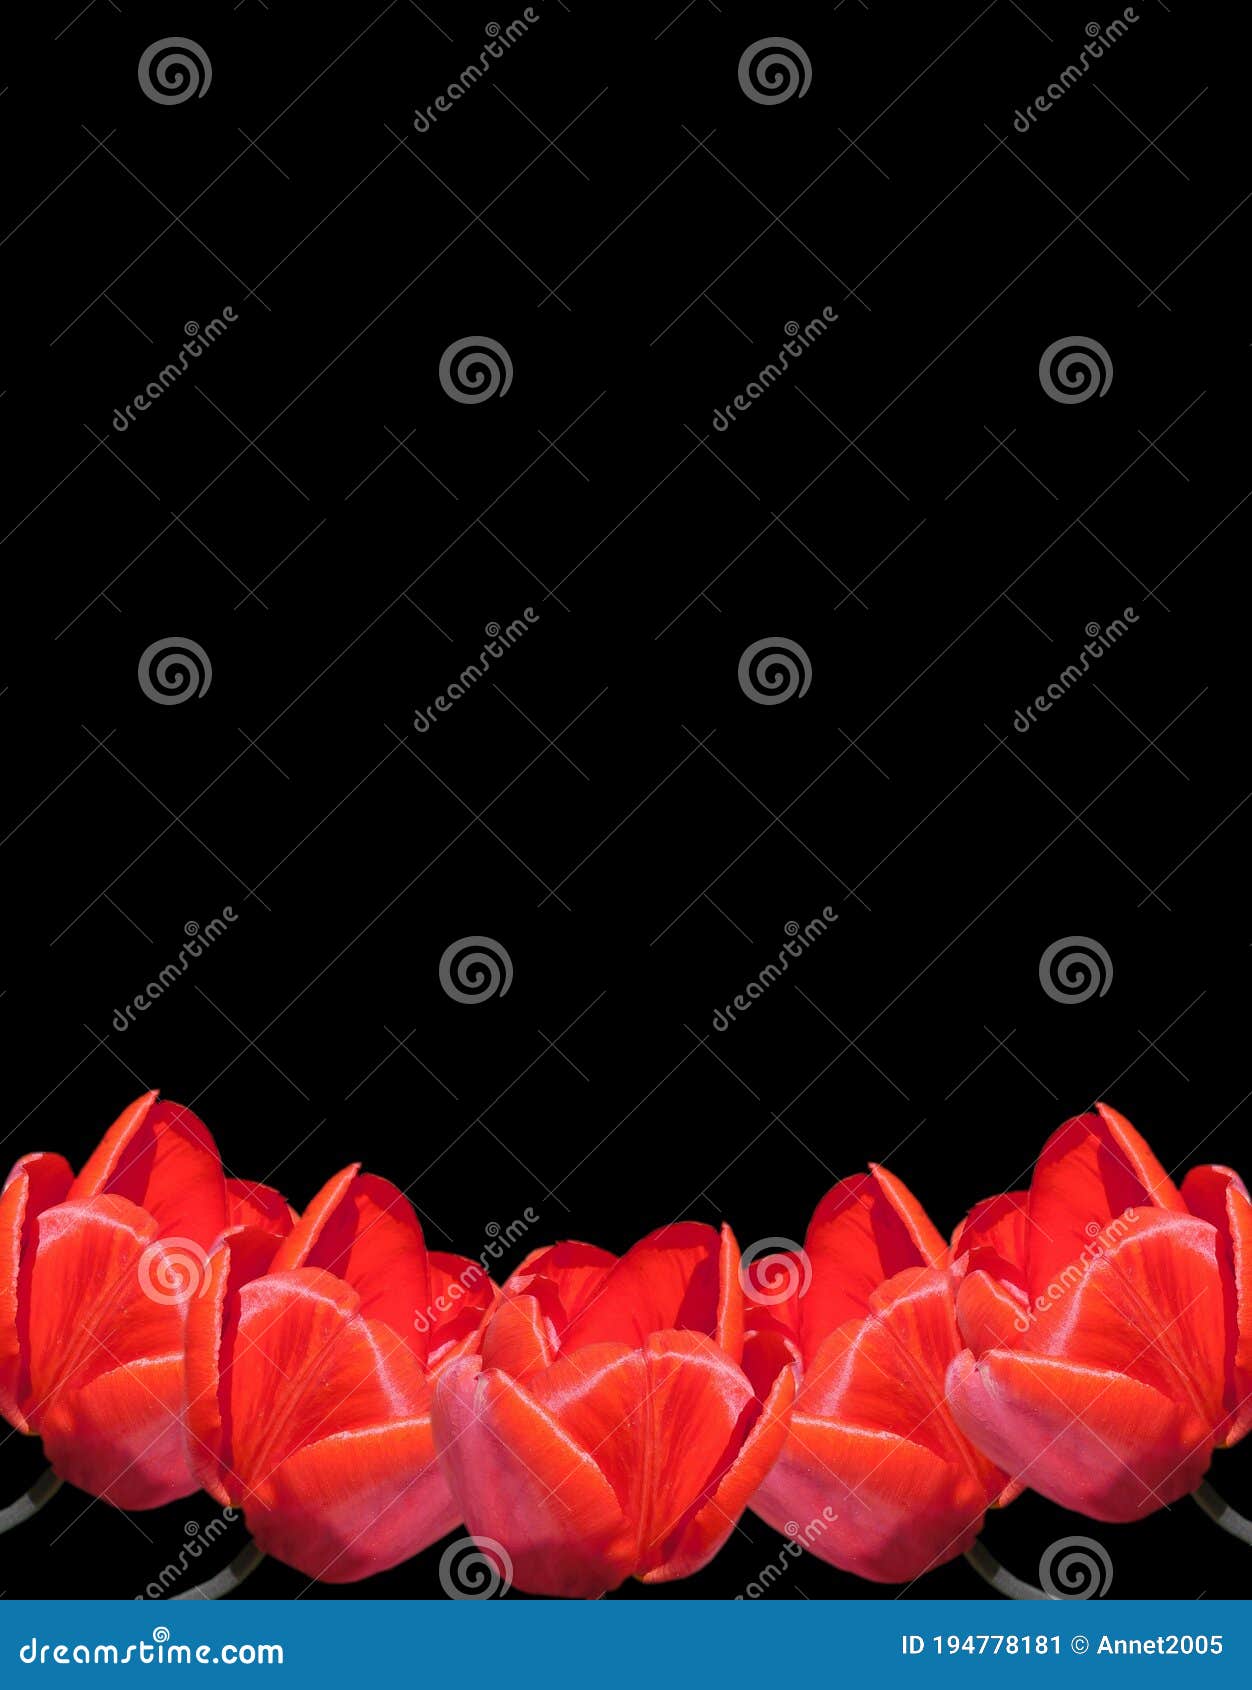 Border Frame Of Five Natural Red Tulip Flowers On Black Background Stock Image Image Of Fresh Five 194778181